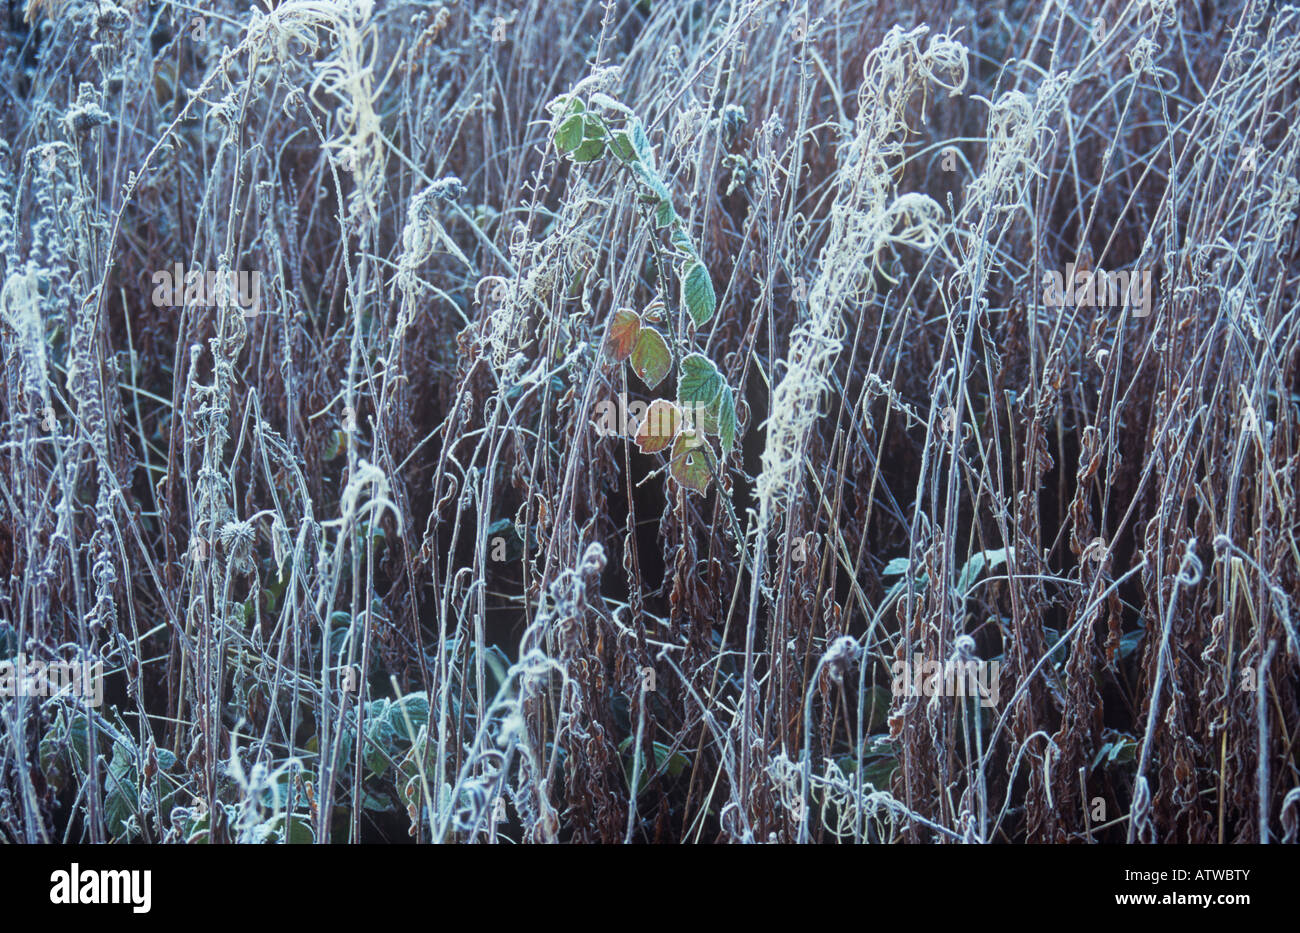 Stems of dried winter Rosebay willowherb covered in frost and punctuated by green and orange leaves of Blackberry Stock Photo